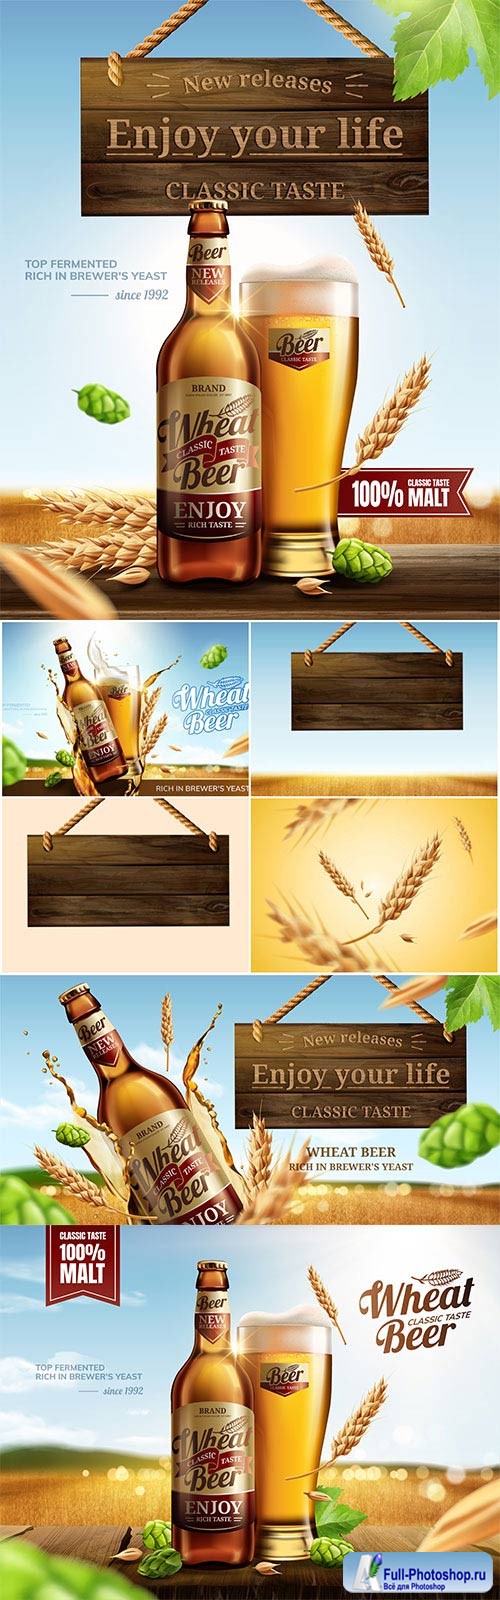 Attractive glass bottle wheat beer in 3d vector illustration